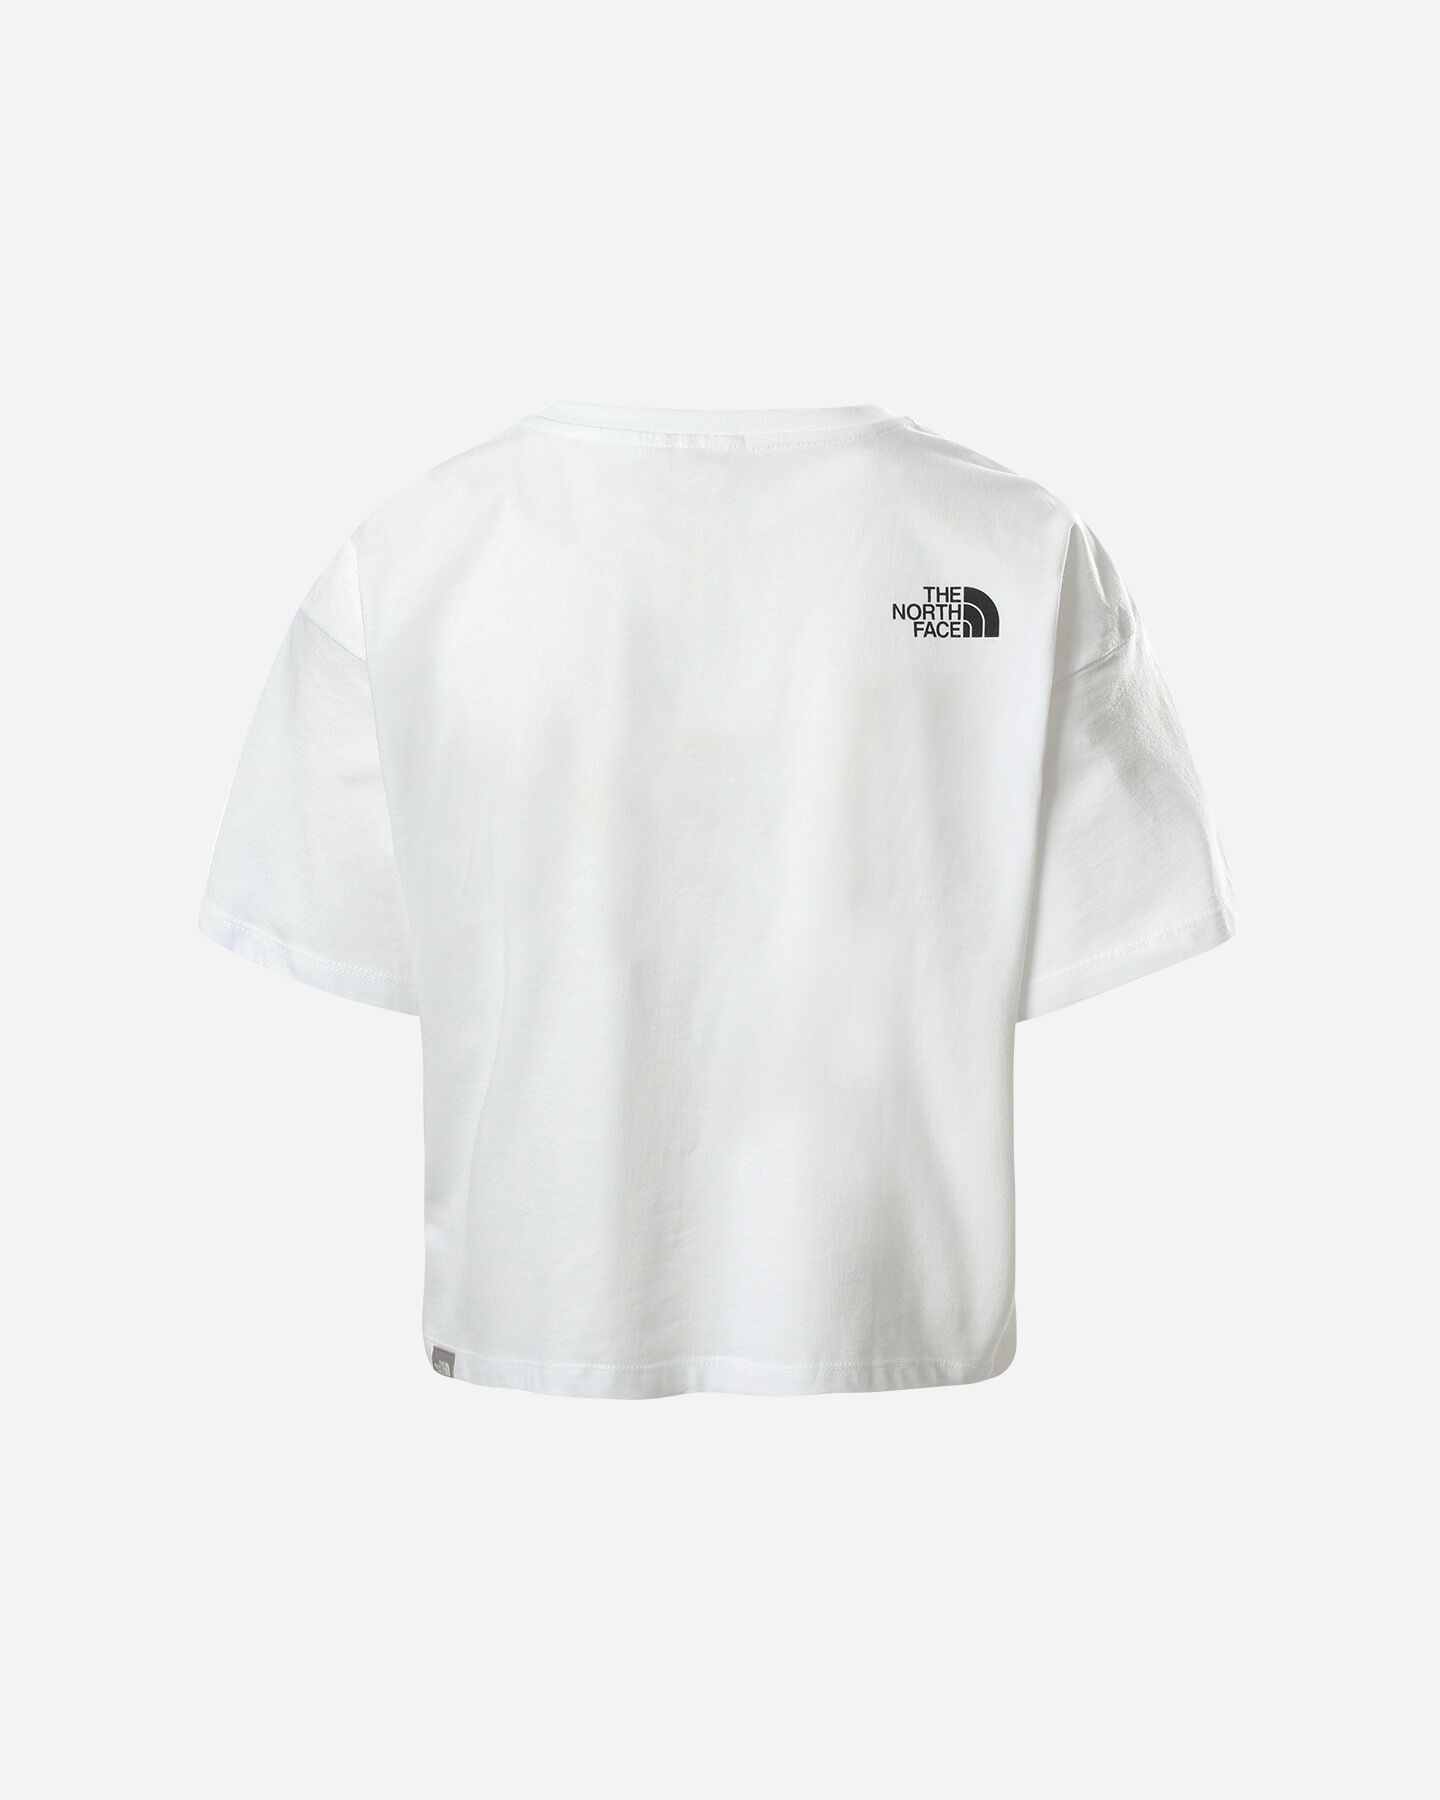  T-Shirt THE NORTH FACE CROP DOME W S5203586 scatto 1